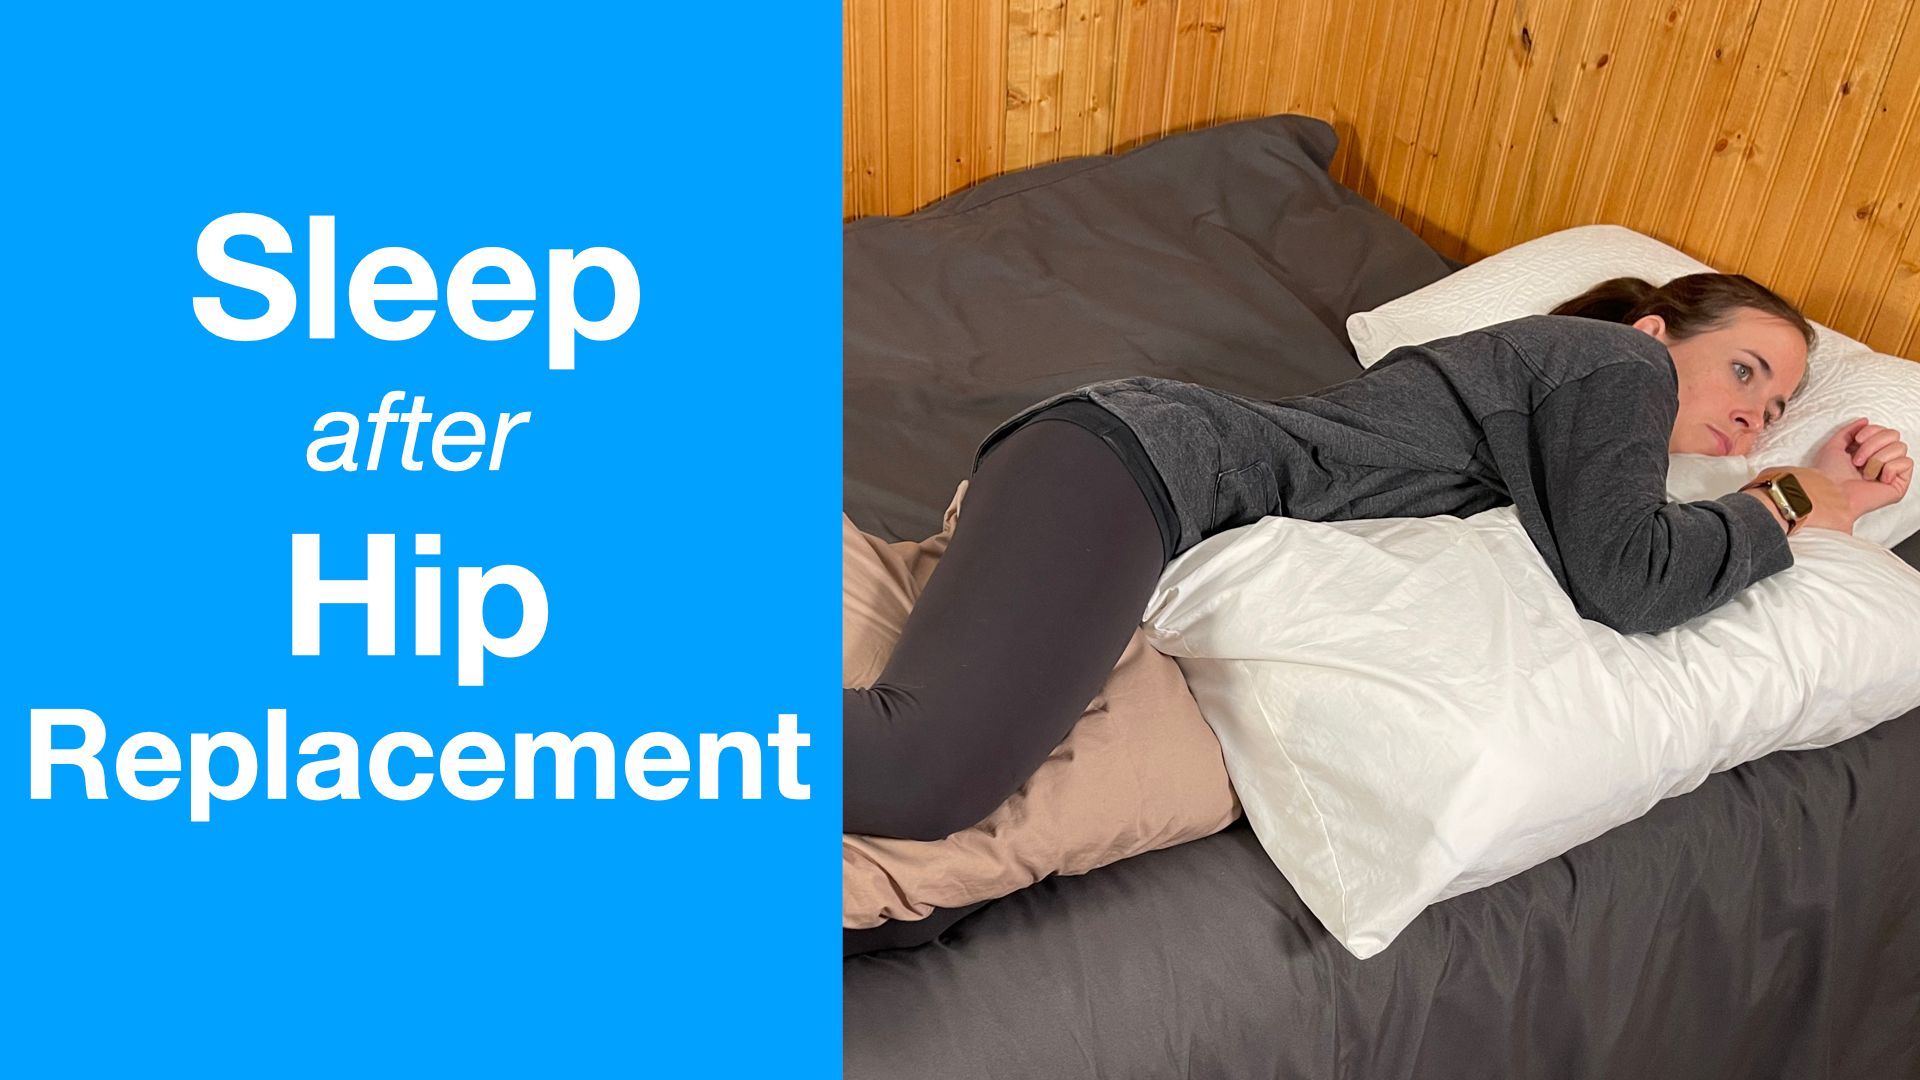 Will Sleeping With A Pillow Help for Hip Pain?